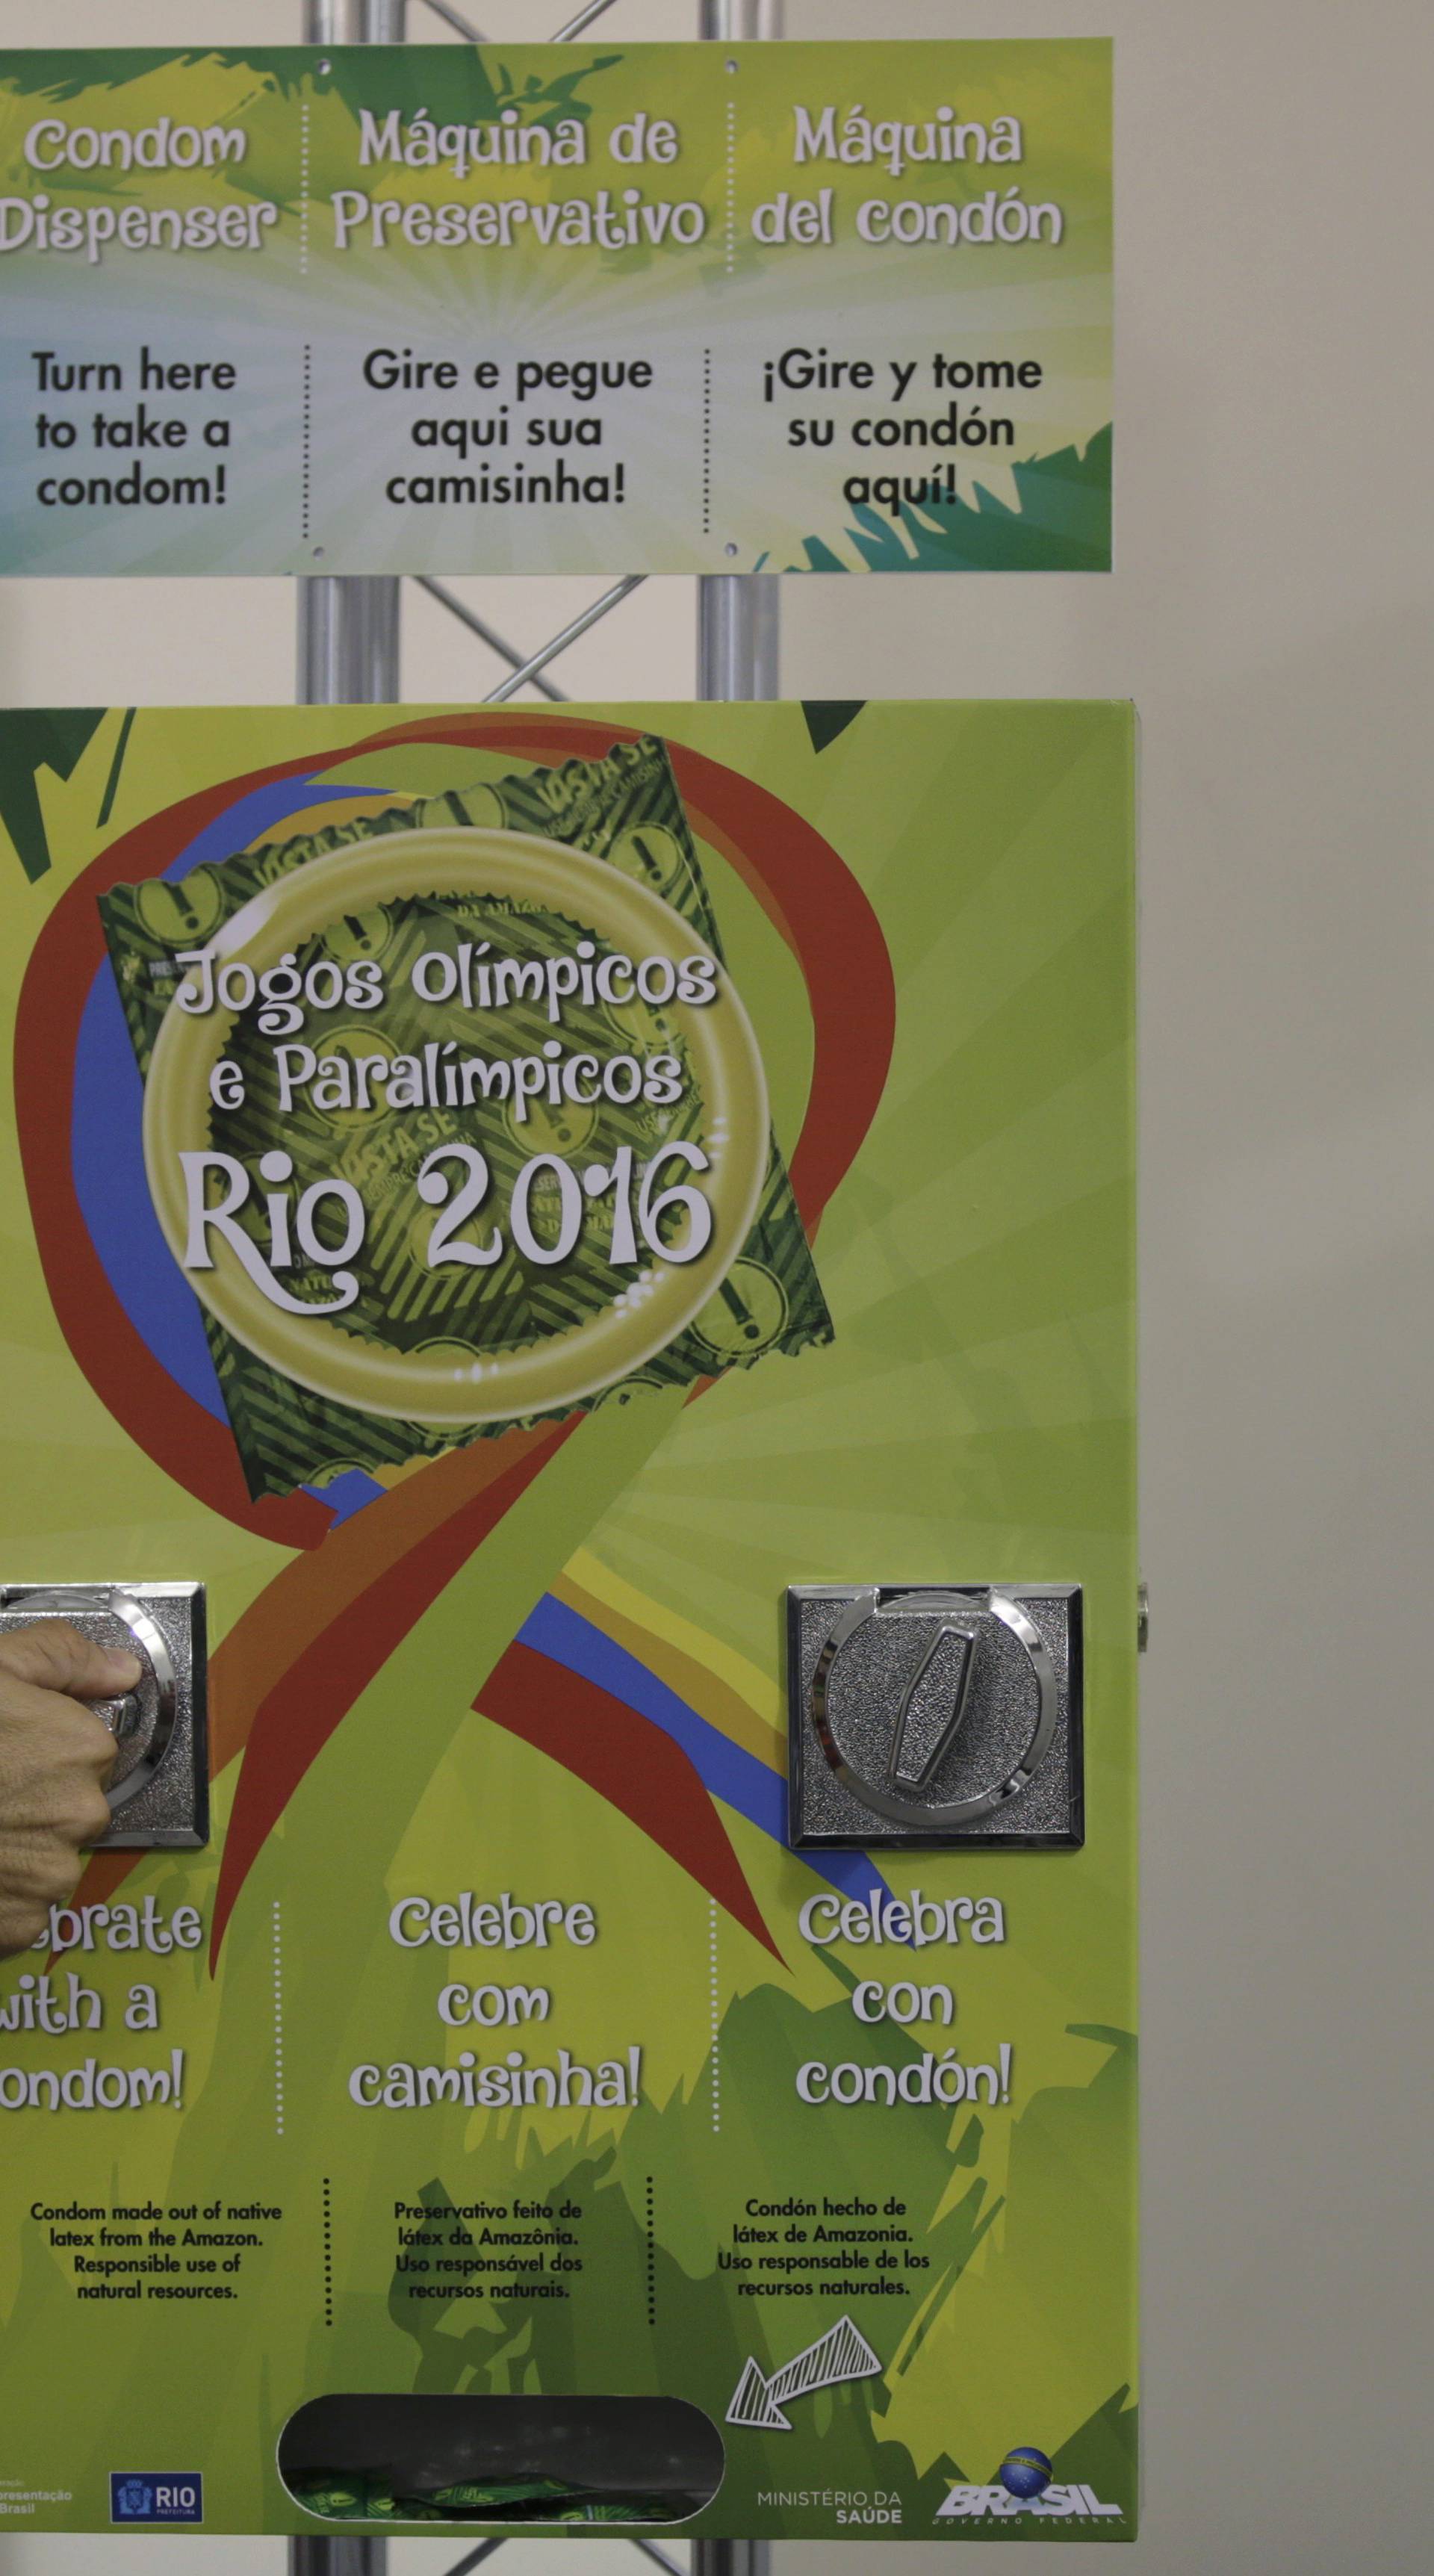  sports doctor demonstrates the operation of a condom dispenser inside the Olympic Village in Rio de Janeiro